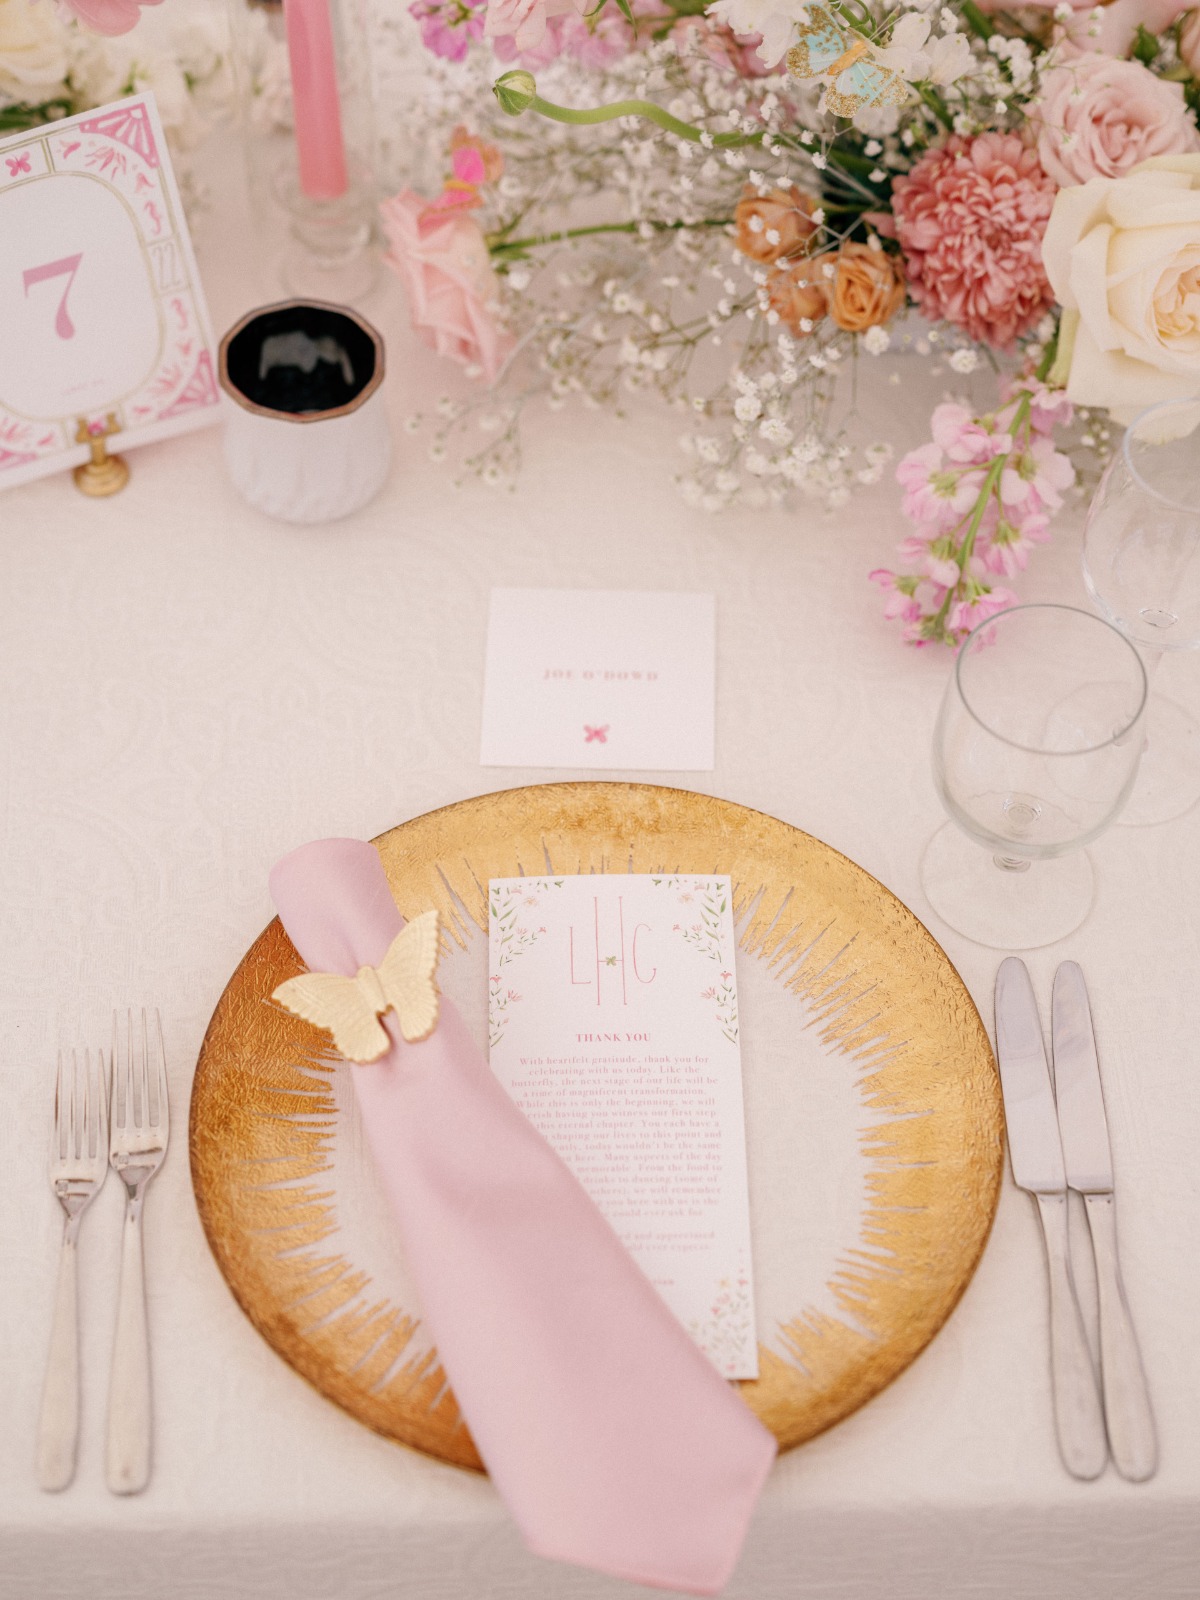 Reception place-setting with butterfly napkin holder